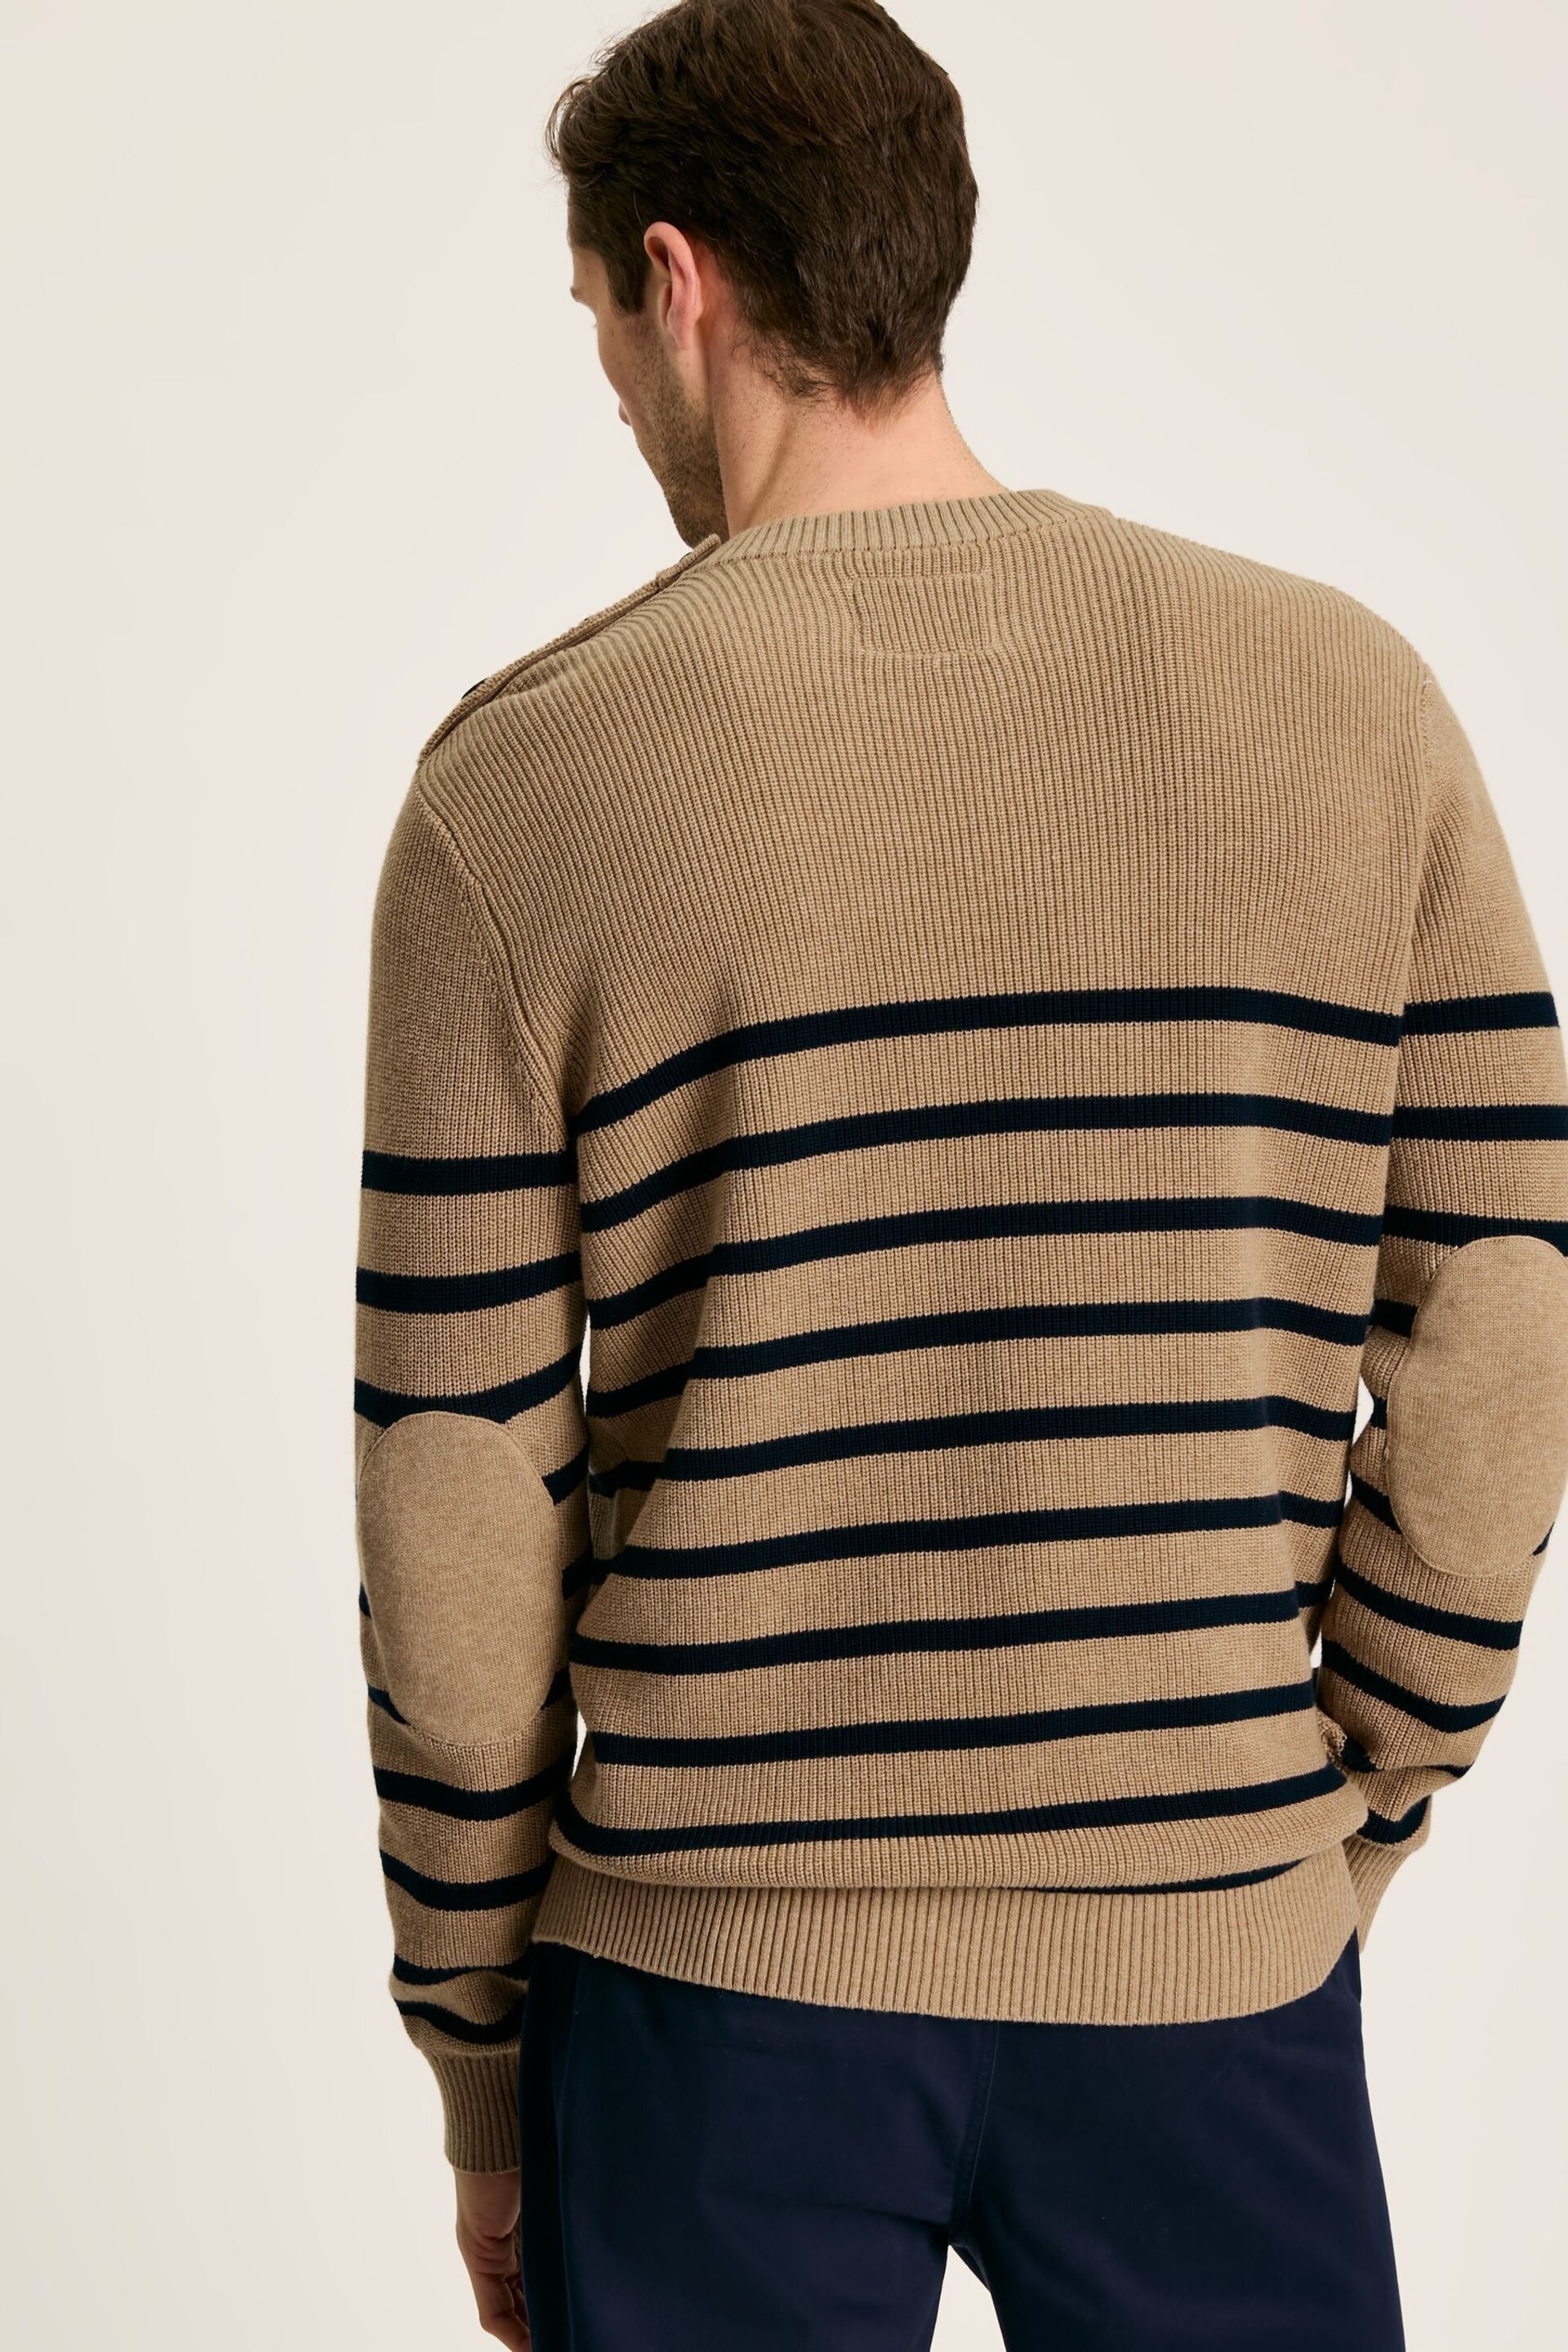 Joules Breton Navy Stripe Crew Neck Knitted Jumper - Image 2 of 6